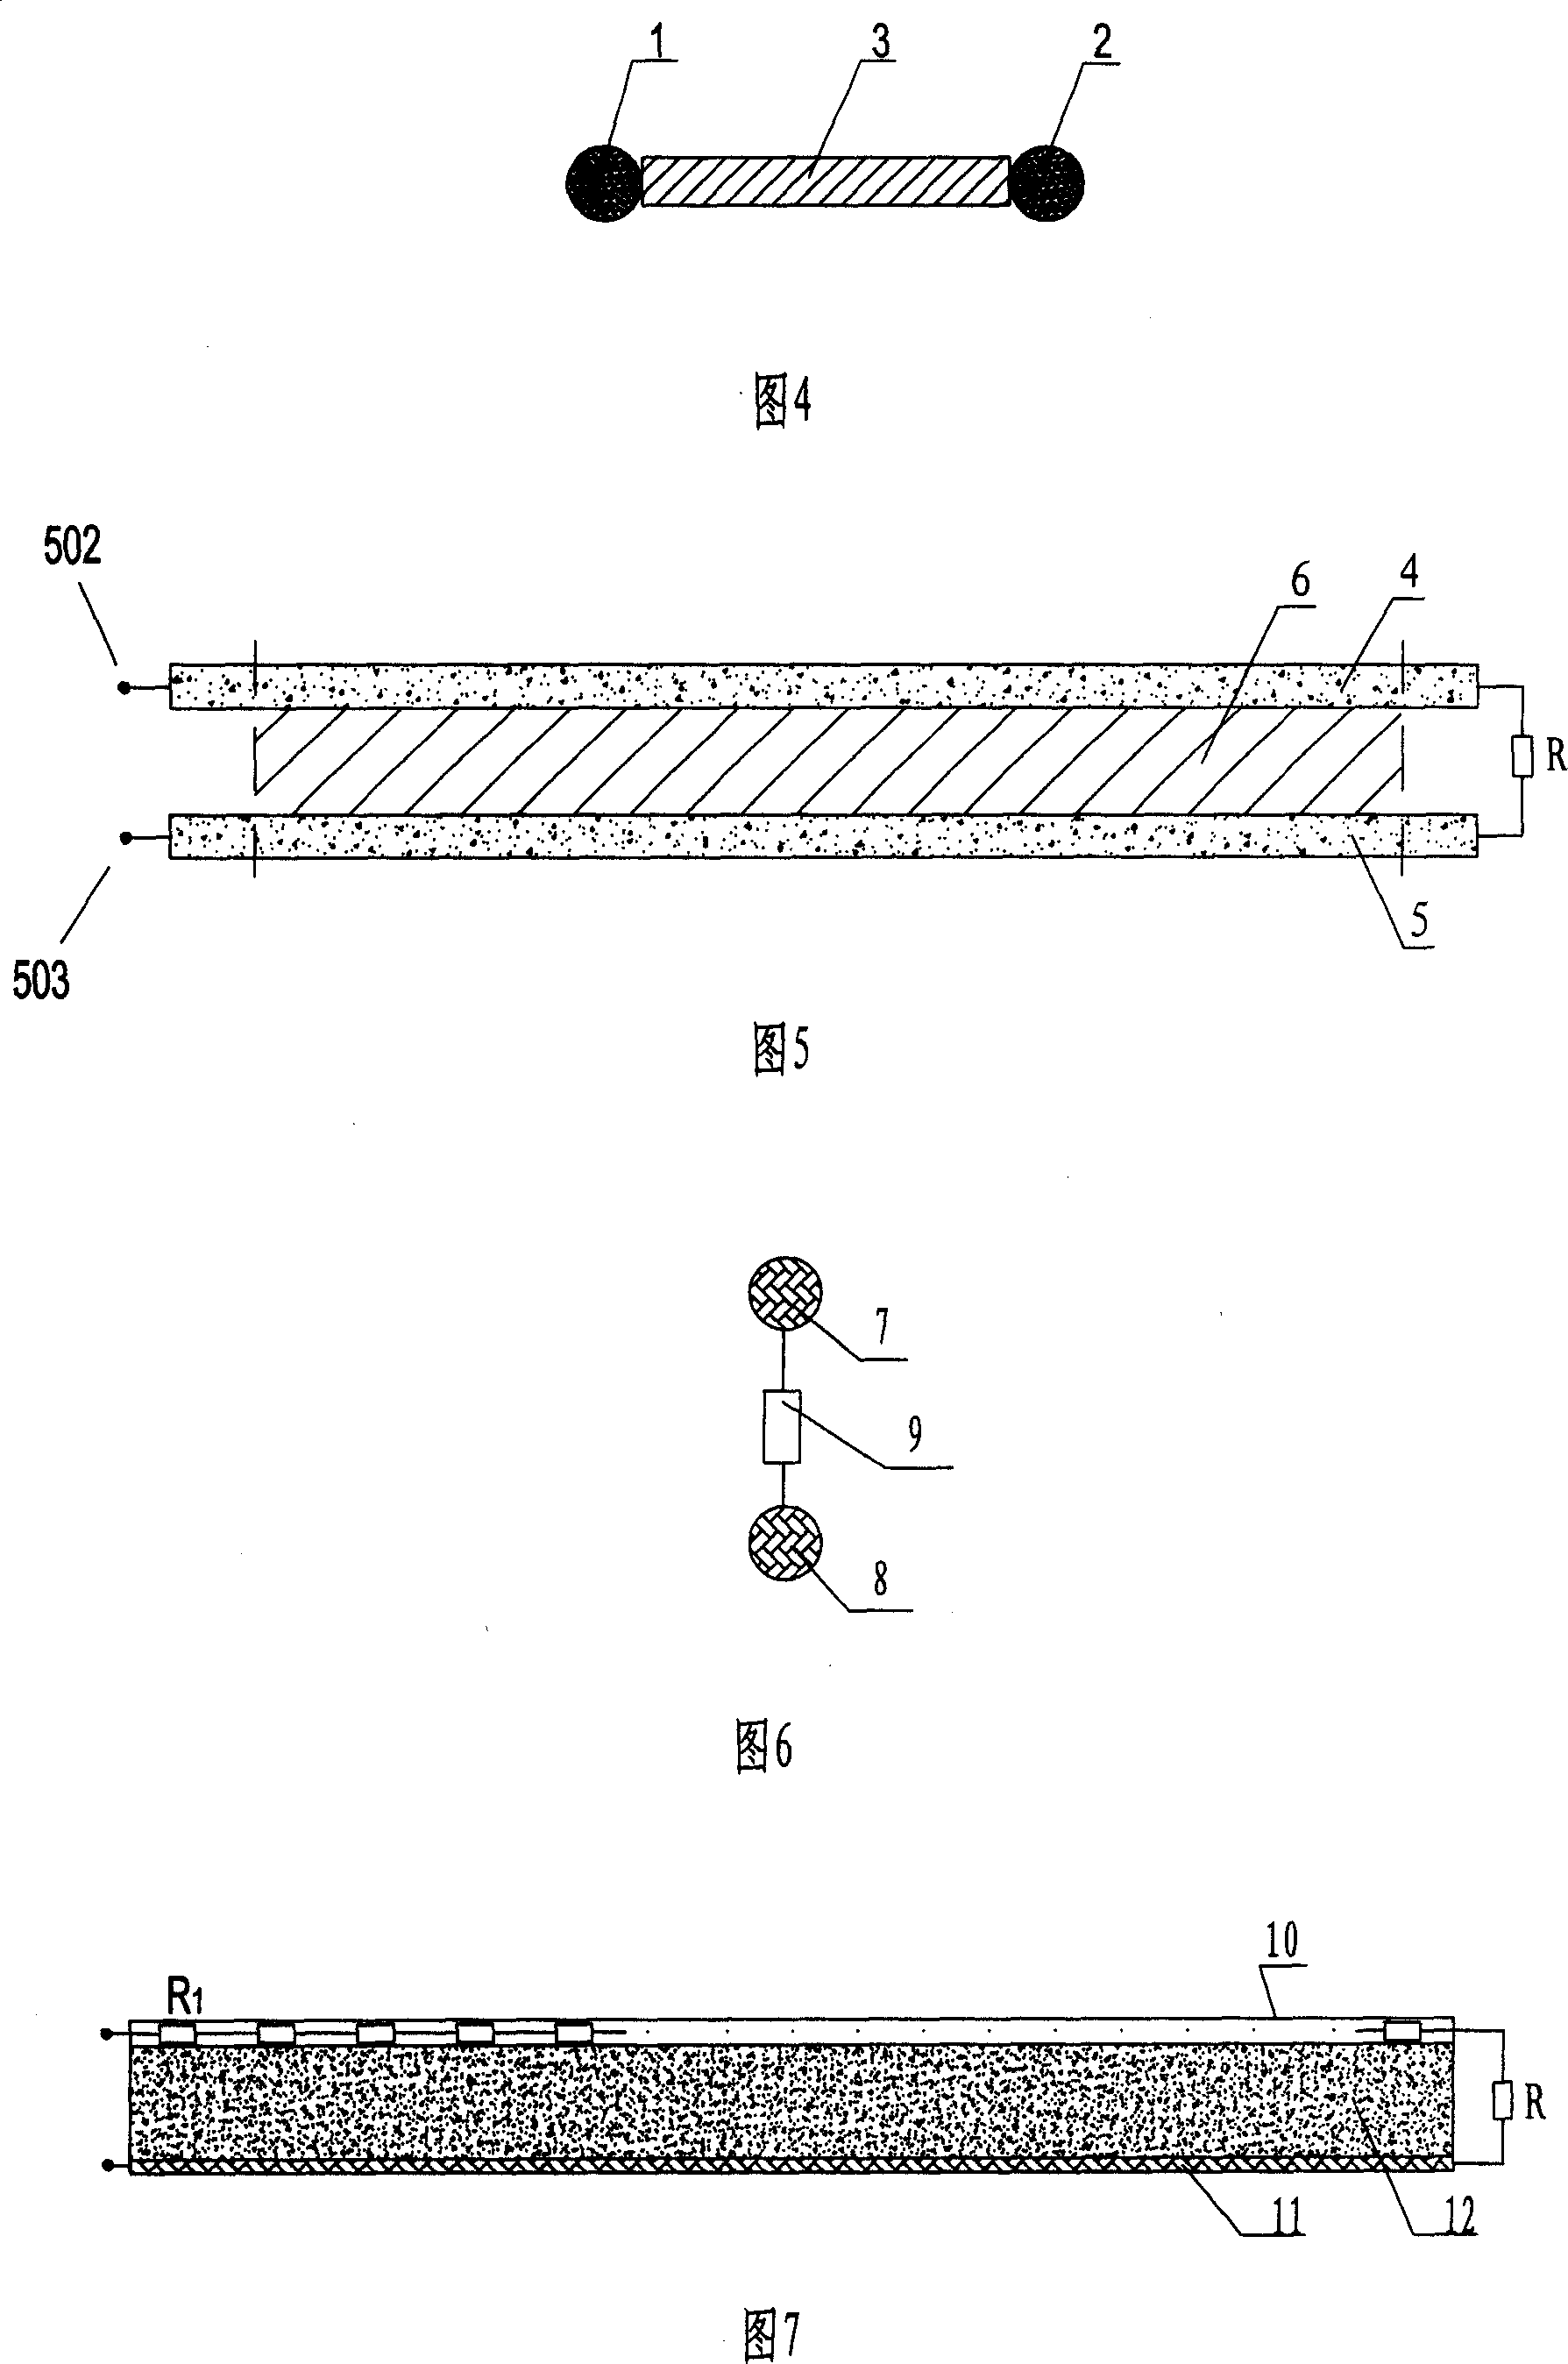 Composite line type temperature sensing fire detector and its data fusing warning method